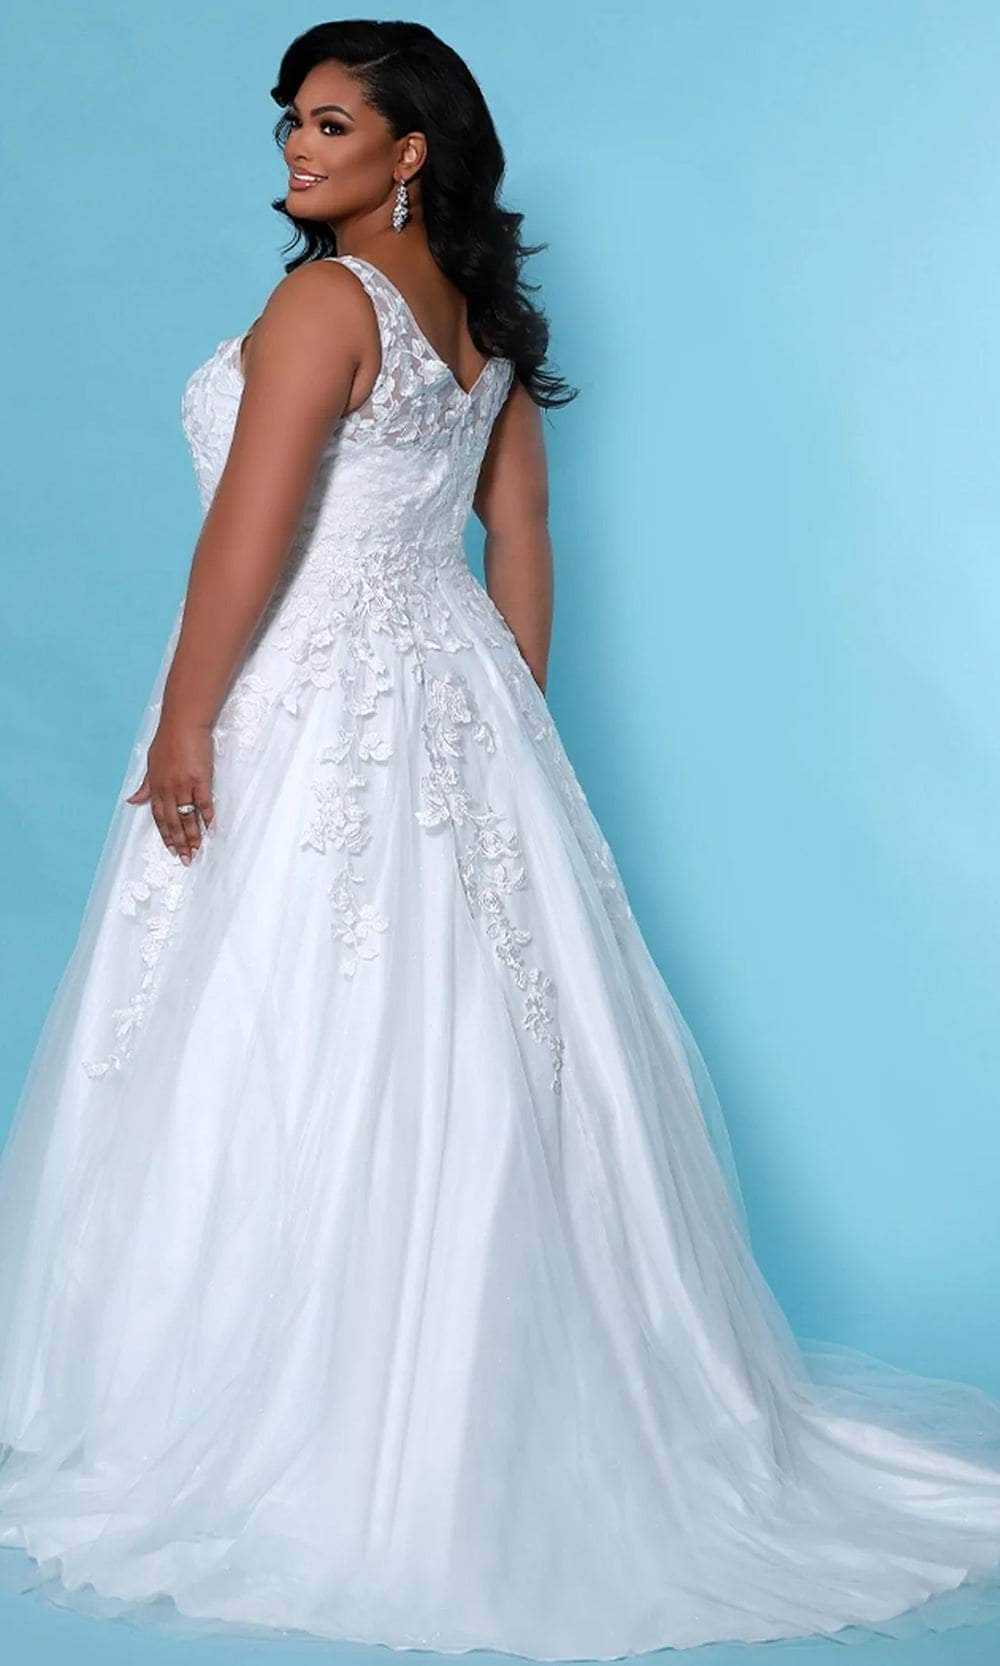 Sydney's Closet Bridal, Sydney's Closet Bridal - SC5259 Floral Embroidered Bridal Gown